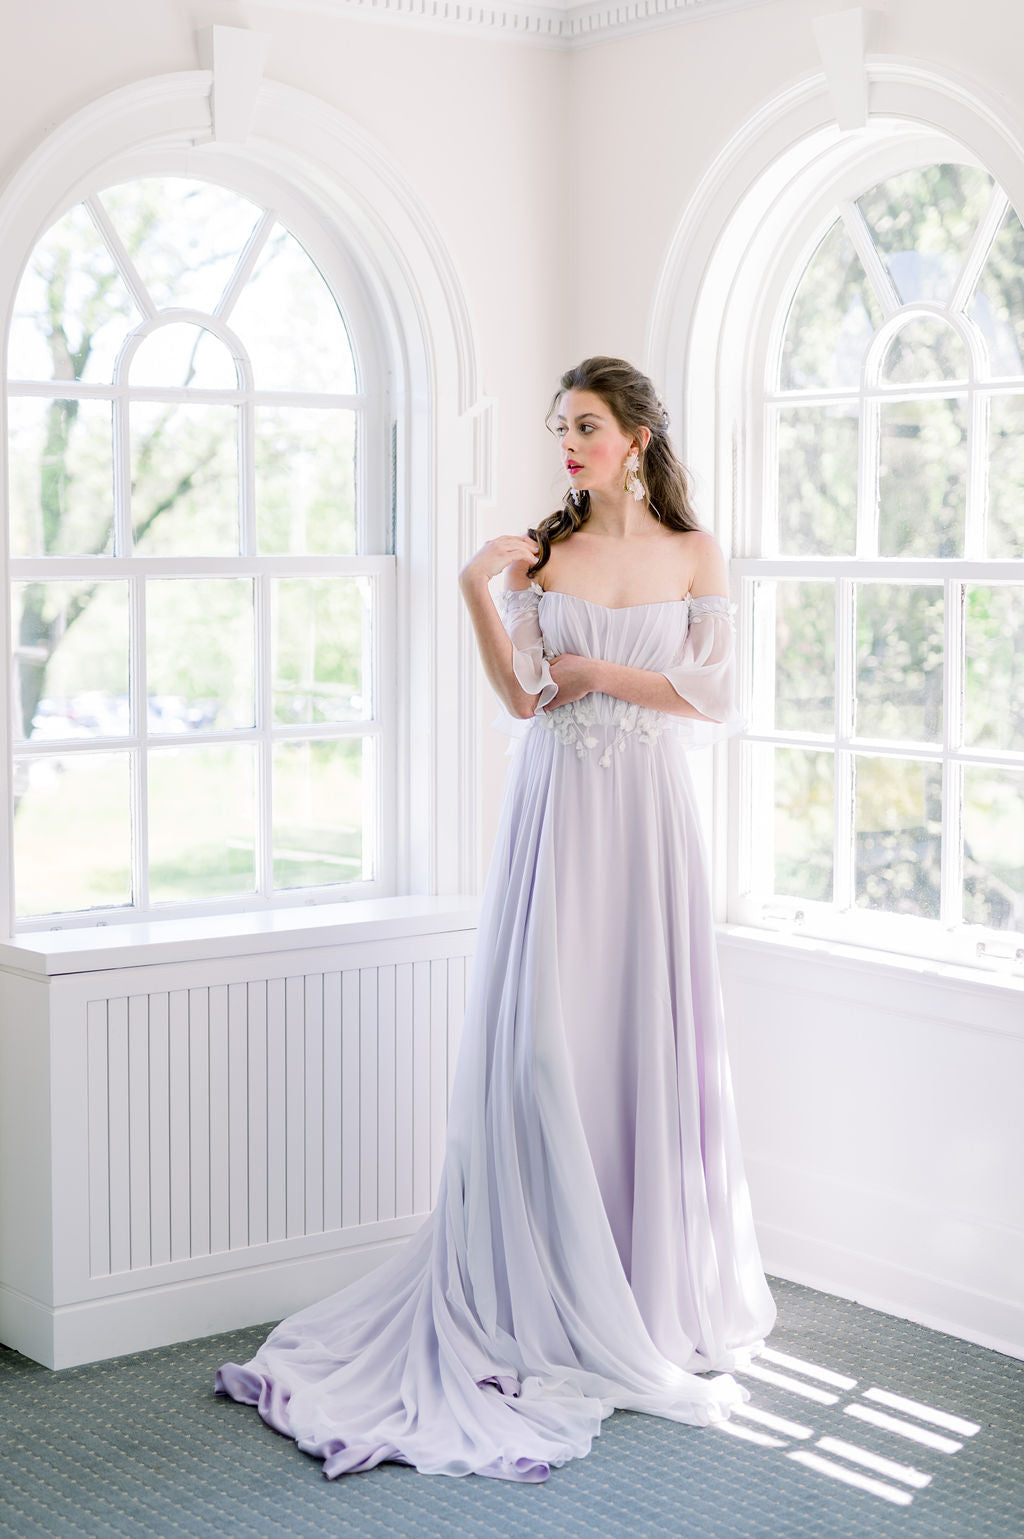 A whimsical lavender wedding dress with a gathered chiffon skirt and 3D leaf applique. Custom made by Catherine Langlois in Toronto, Ontario, Canada.